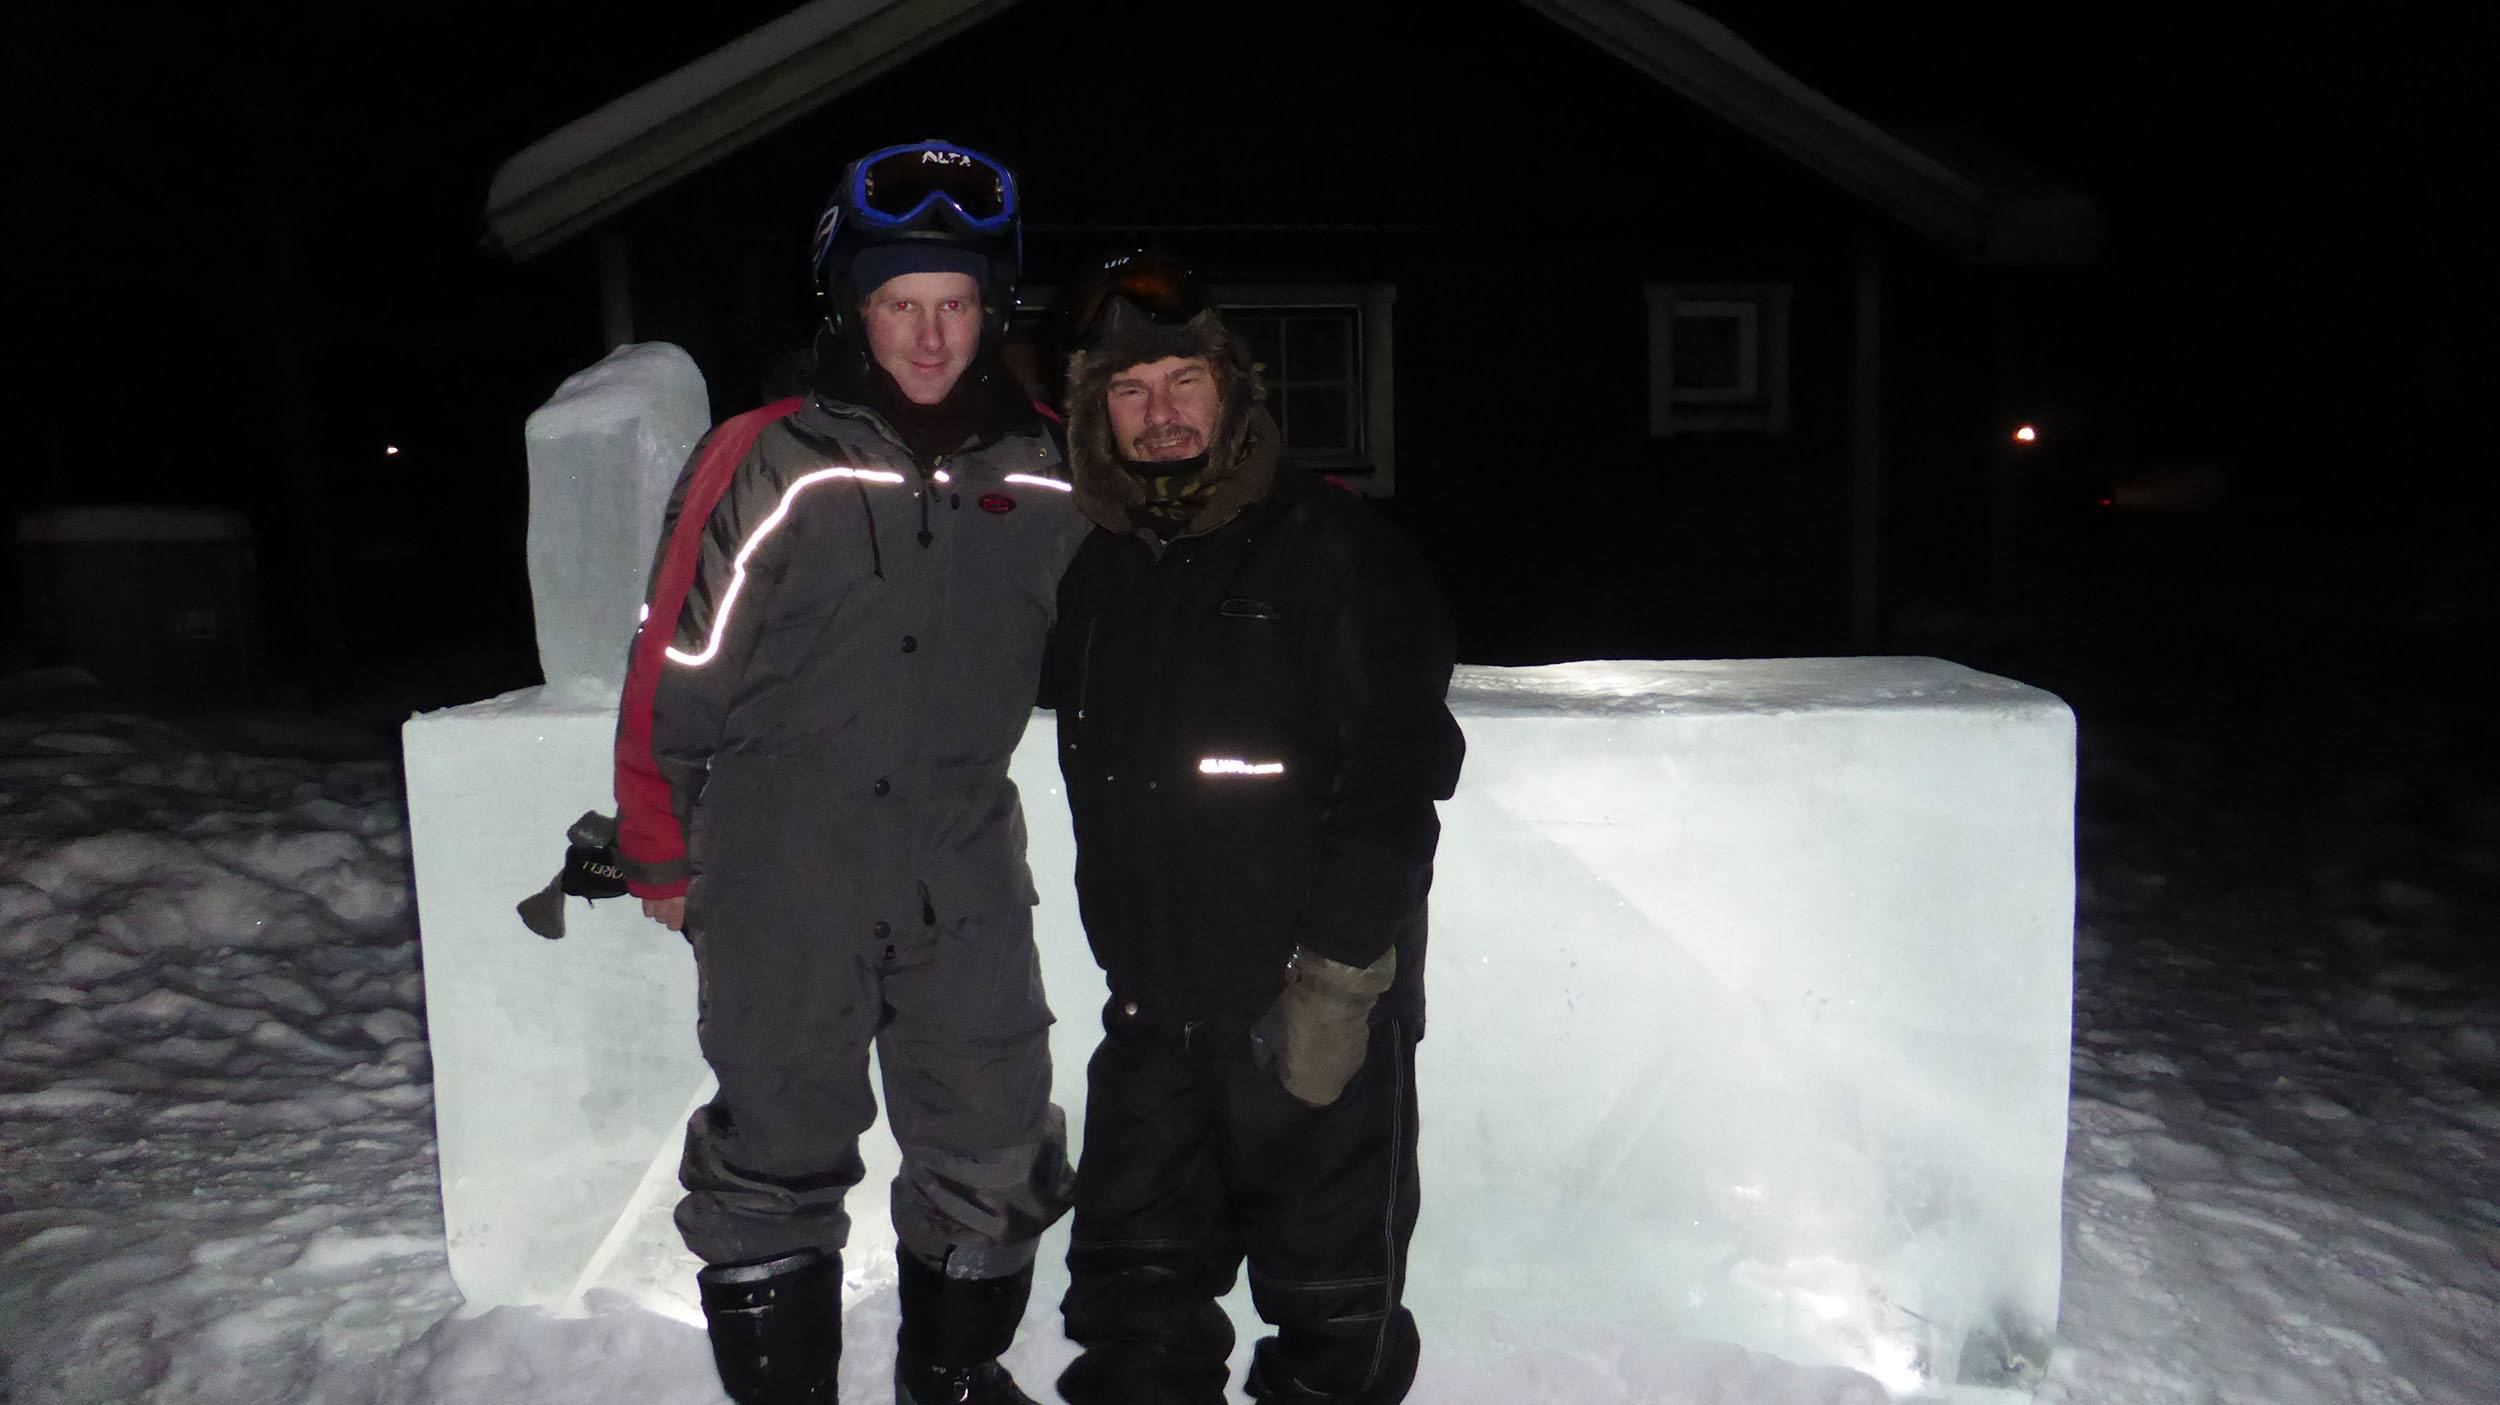 Ben and host of Camp Alta outside the Ice Hotel in Sweden